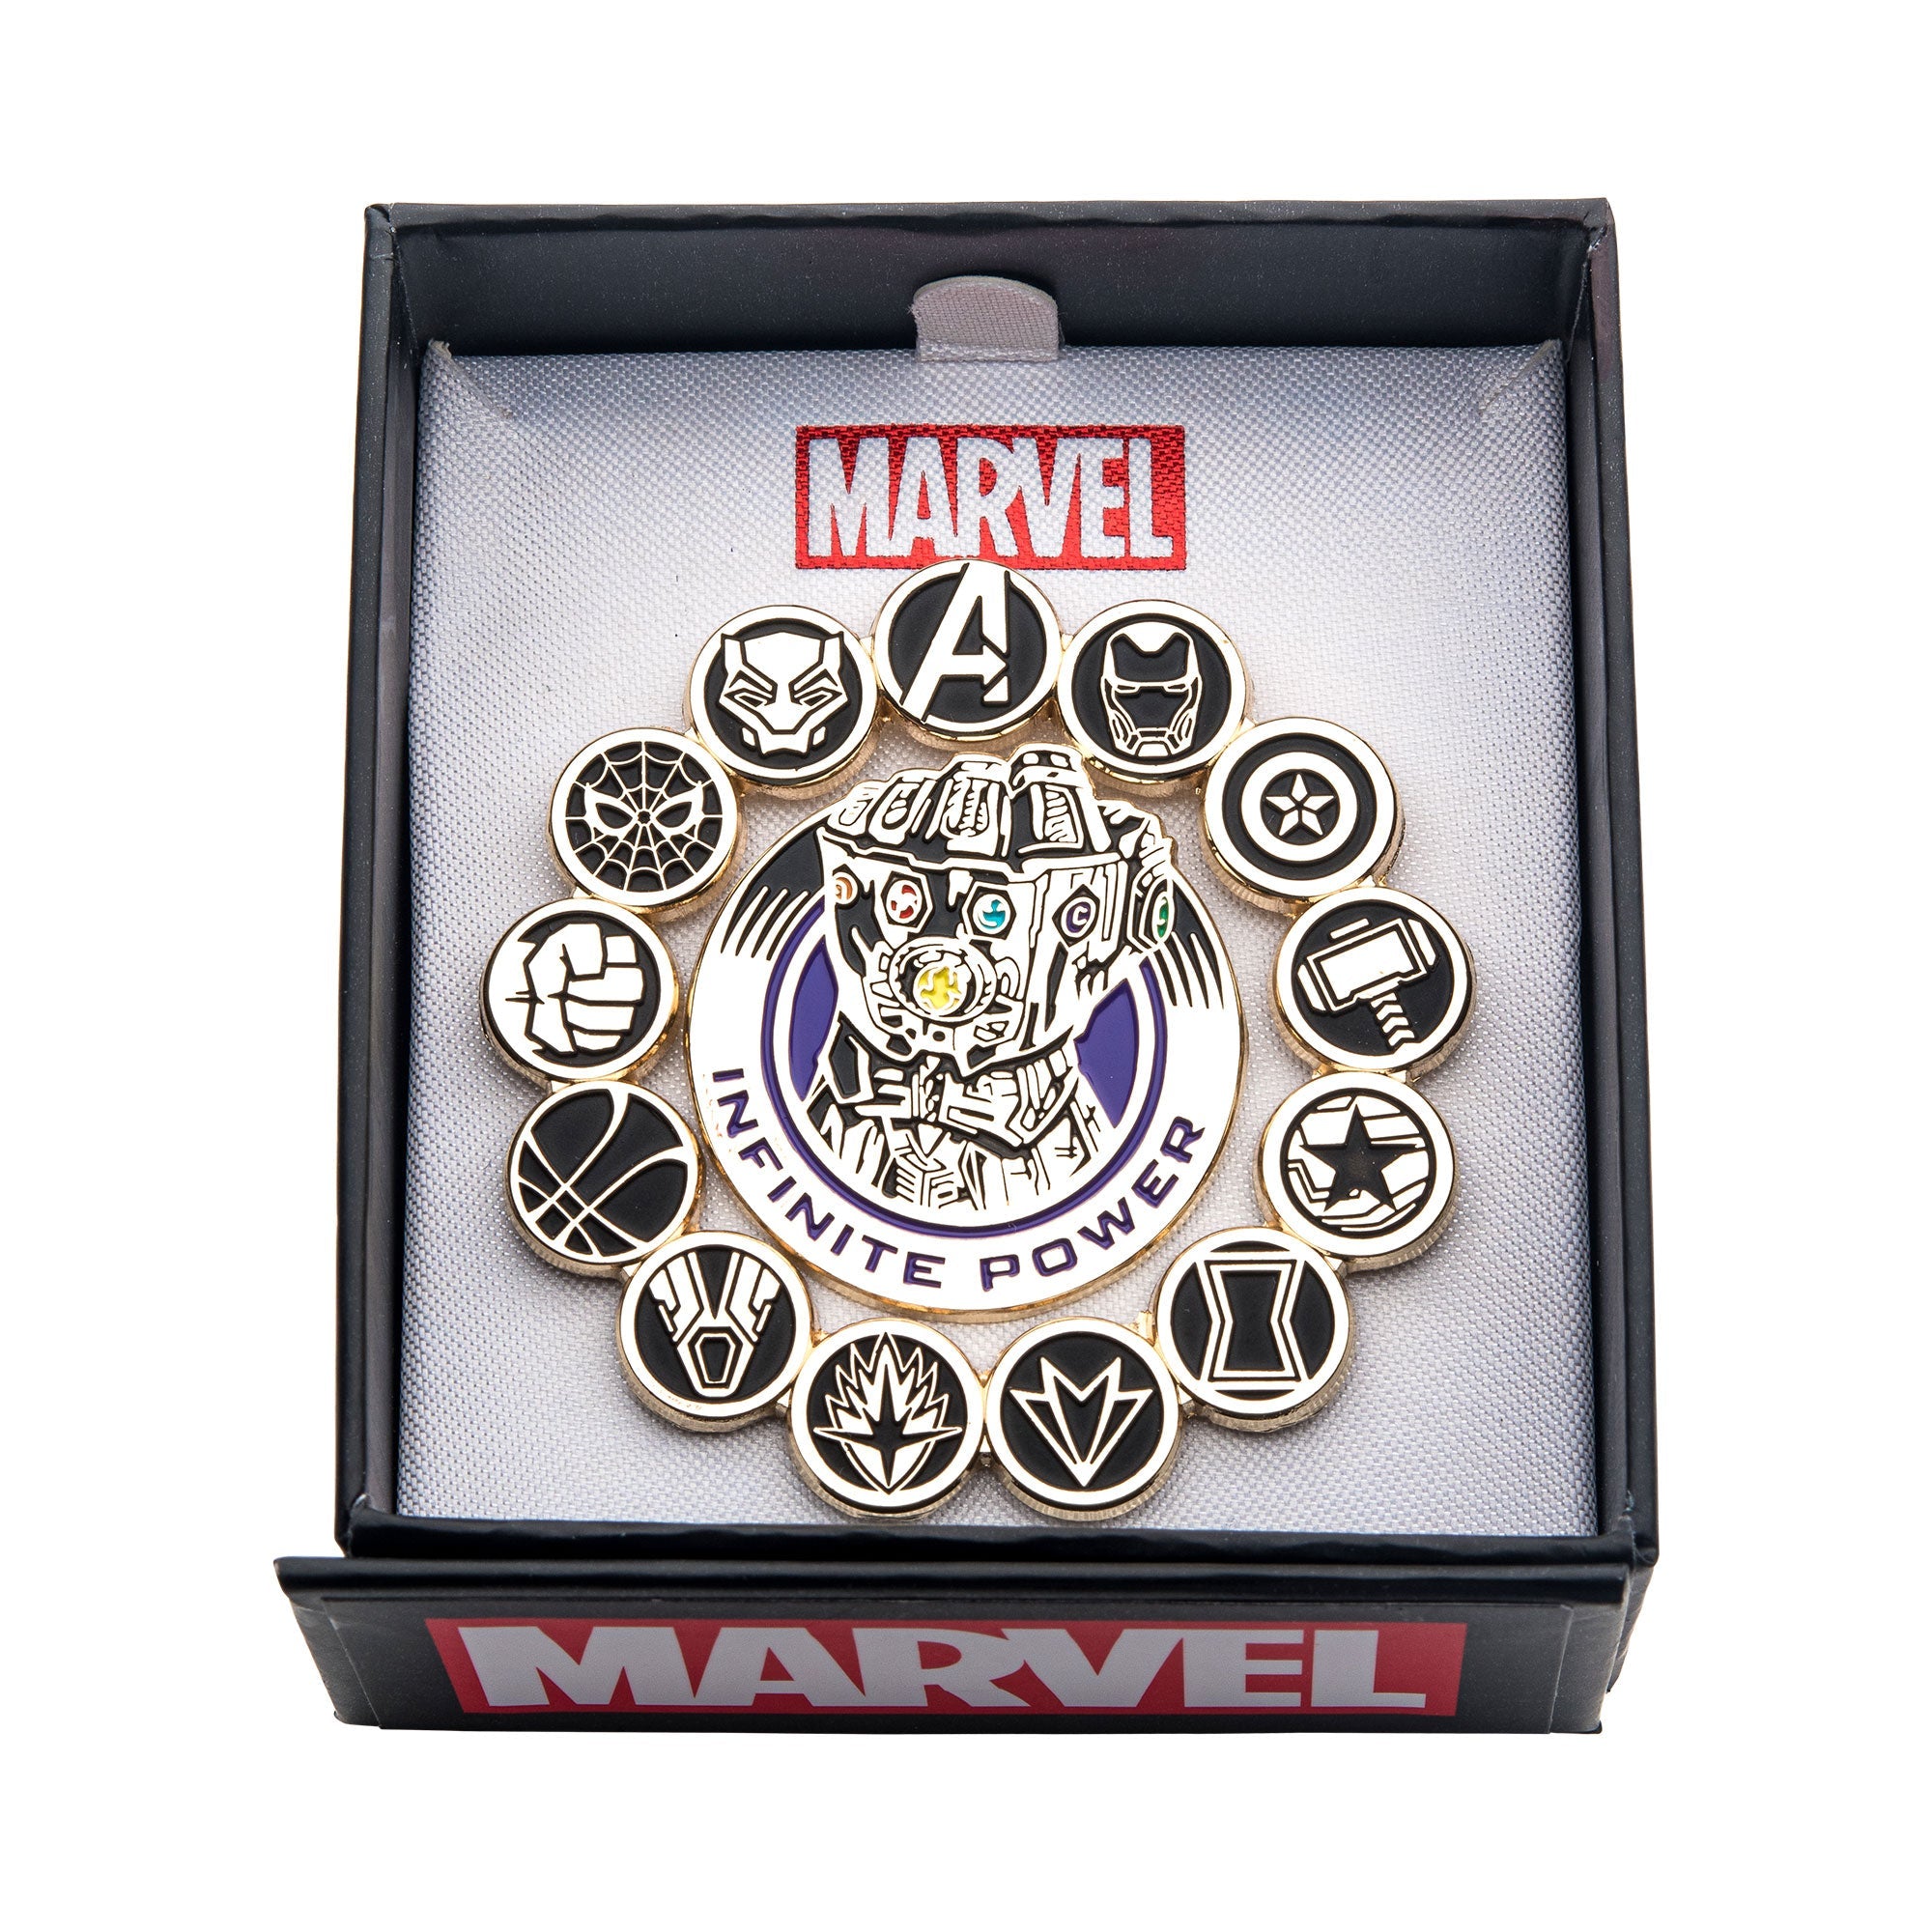 Marvel Avenger Infinity Gaunlet Pin [COMING SOON]